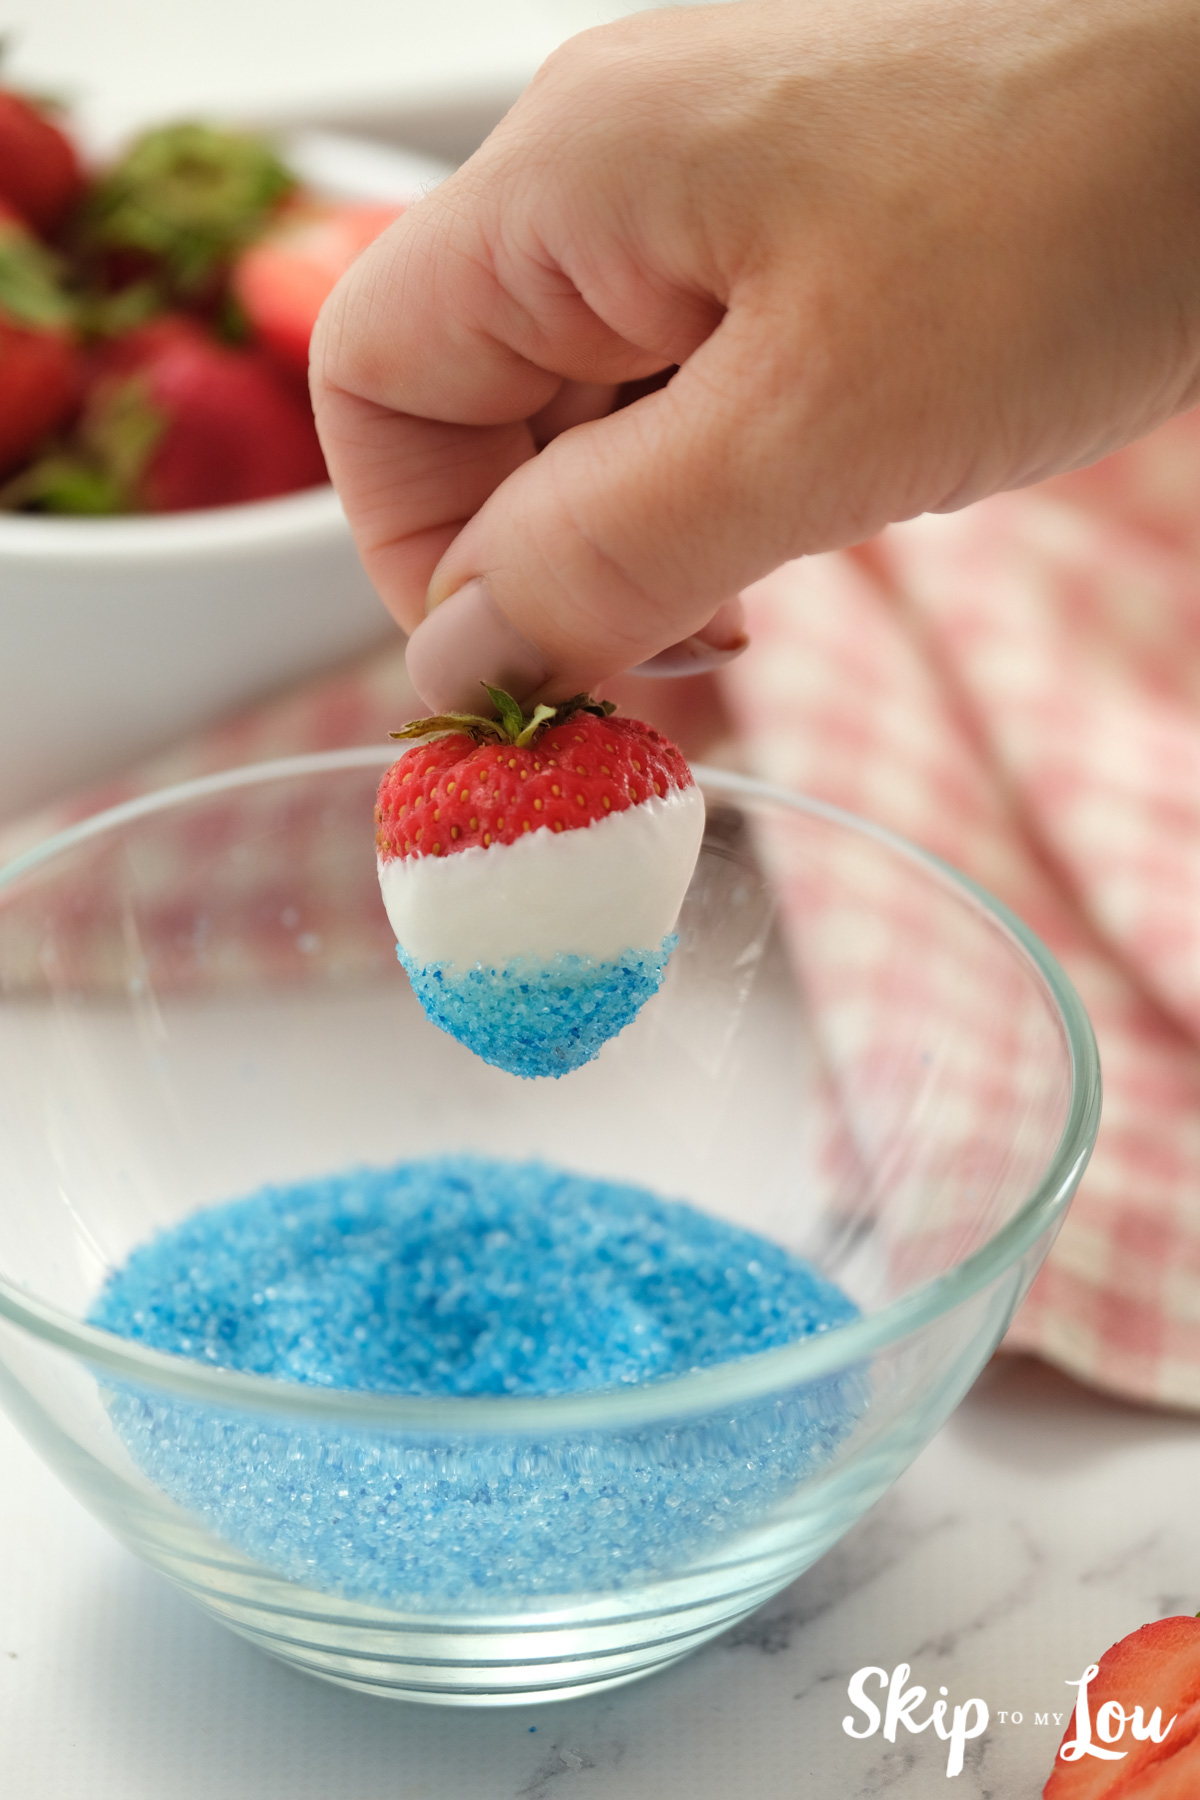 dipping strawberry in blue sanding sugar